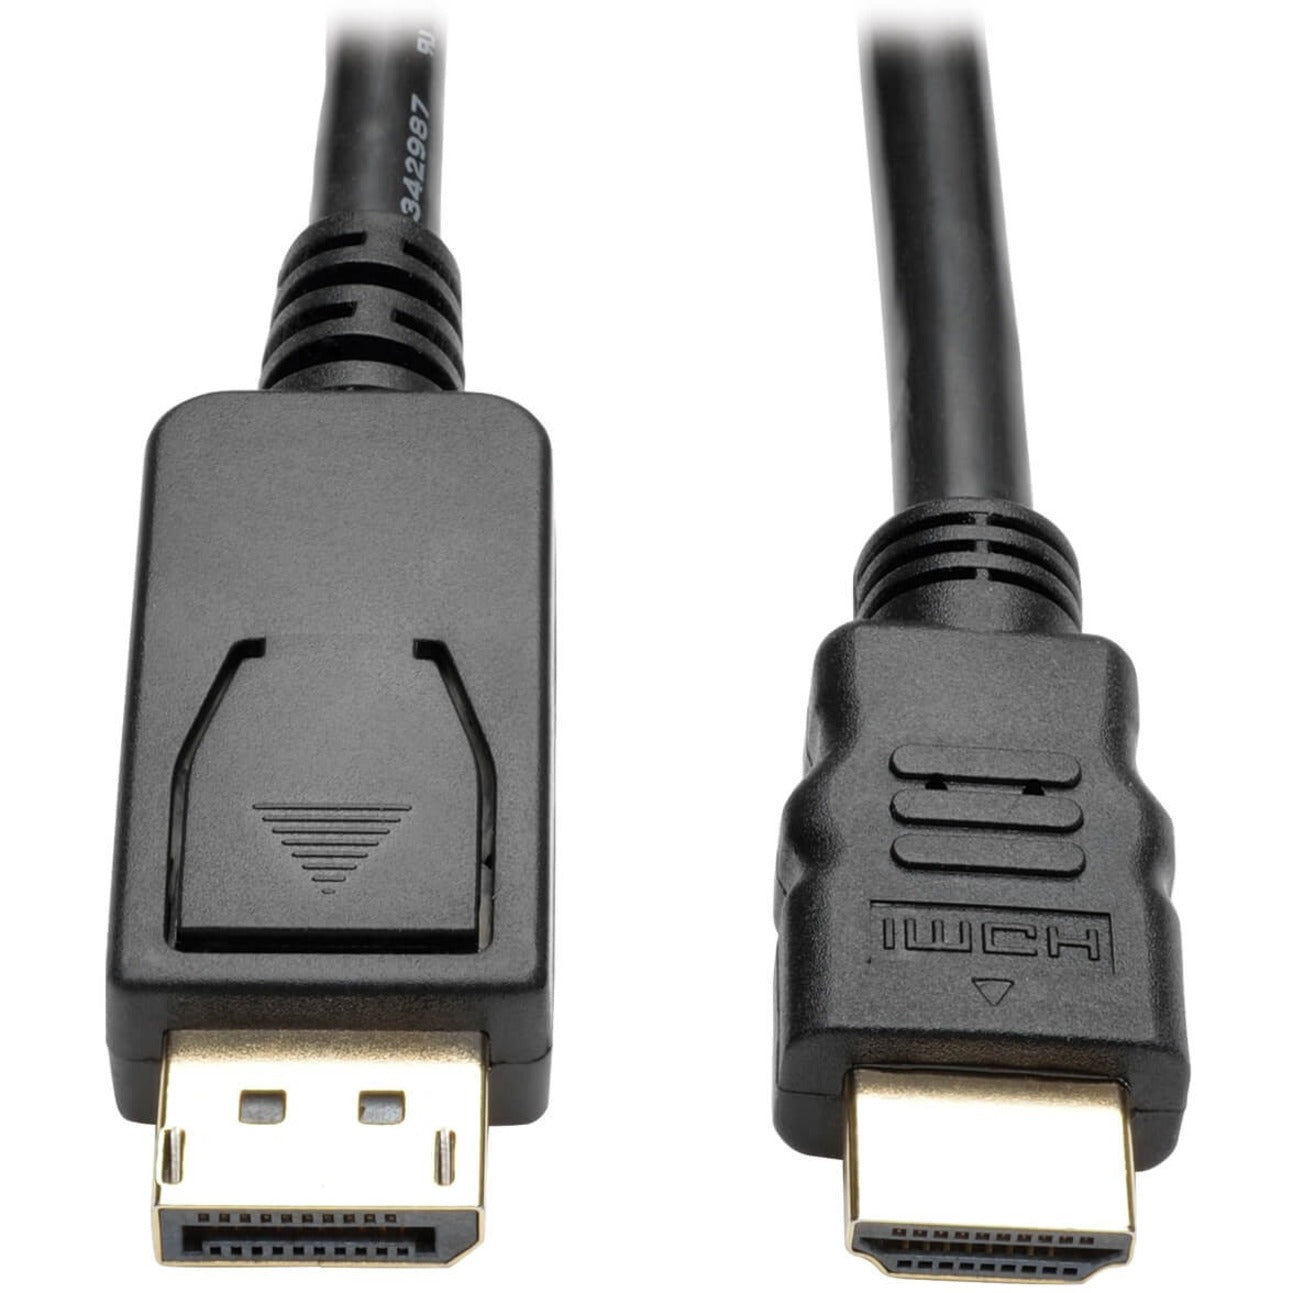 Tripp Lite P582-006-V2 DisplayPort 1.2 to HDMI Adapter Cable 6 ft. UHD Gold-Plated Connectors Black Tripp Lite P582-006-V2 Cavo adattatore DisplayPort 1.2 a HDMI 6 ft. UHD Connettori placcati in oro Nero